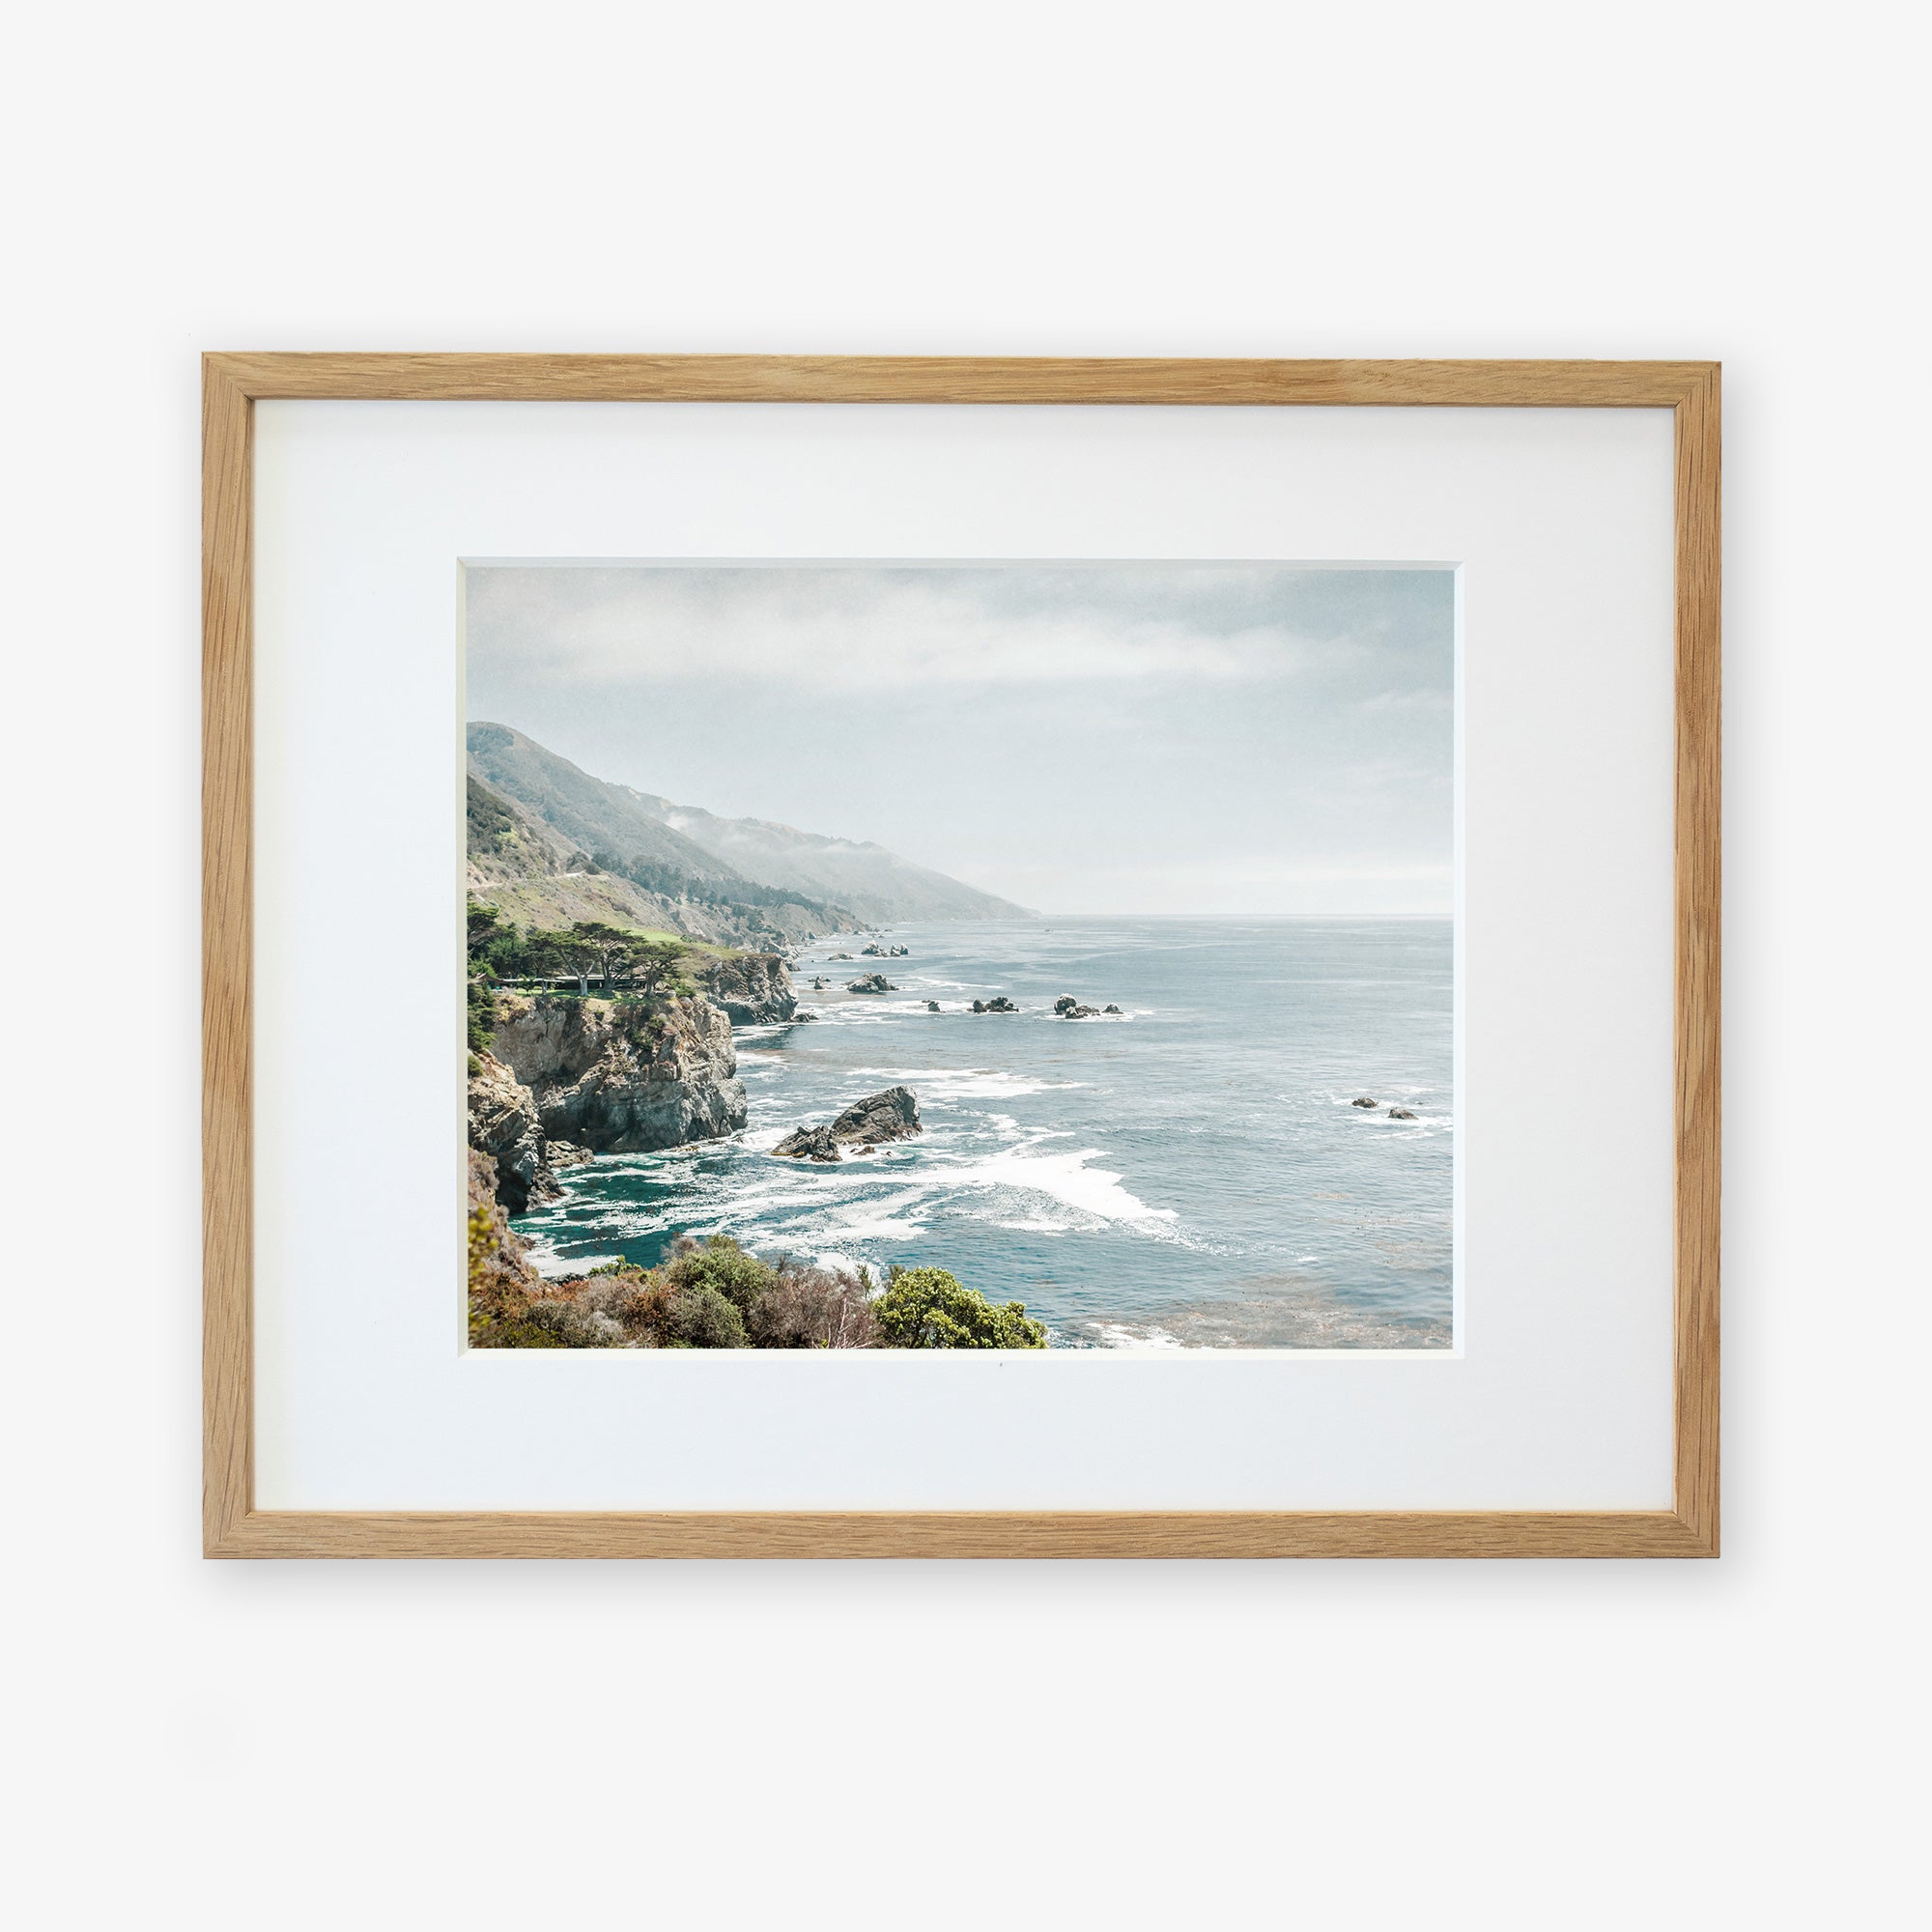 A framed wall art featuring a picturesque coastal scene from Big Sur, with cliffs, the ocean, and distant fog. The light wooden frame complements the serene coastal colors. - Offley Green's Big Sur Landscape Print, 'Rocky Rocks'